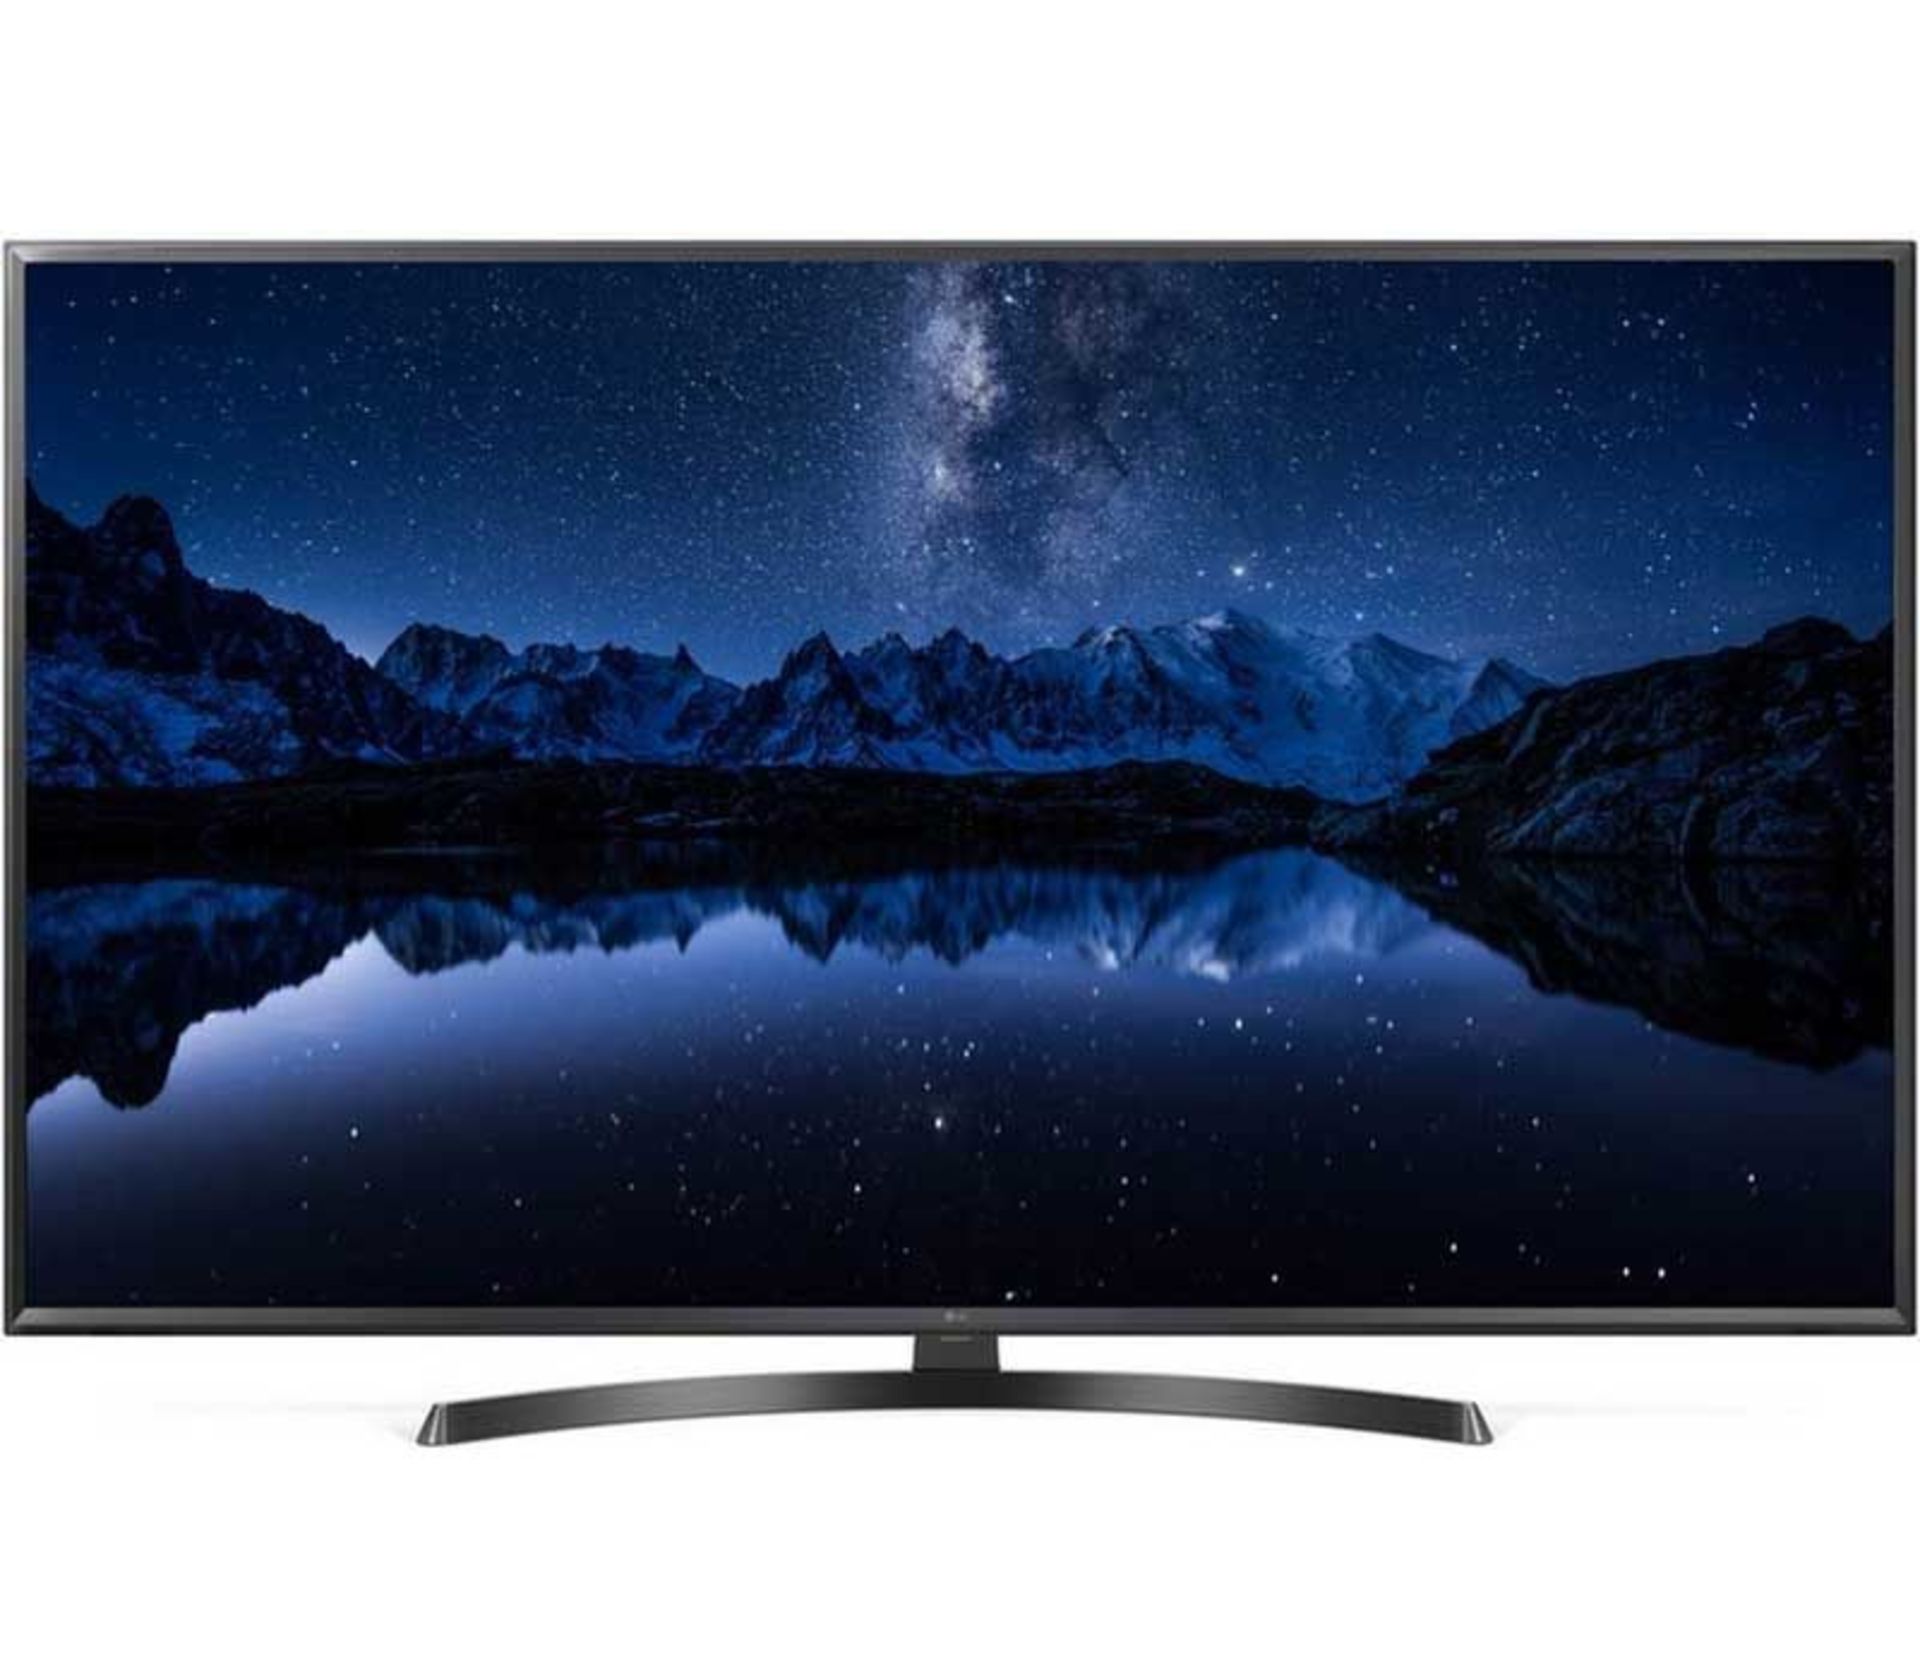 V Grade A LG 43 Inch ACTIVE HDR 4K ULTRA HD LED SMART TV WITH FREEVIEW HD & WEBOS 4.0 & WIFI - AI TV